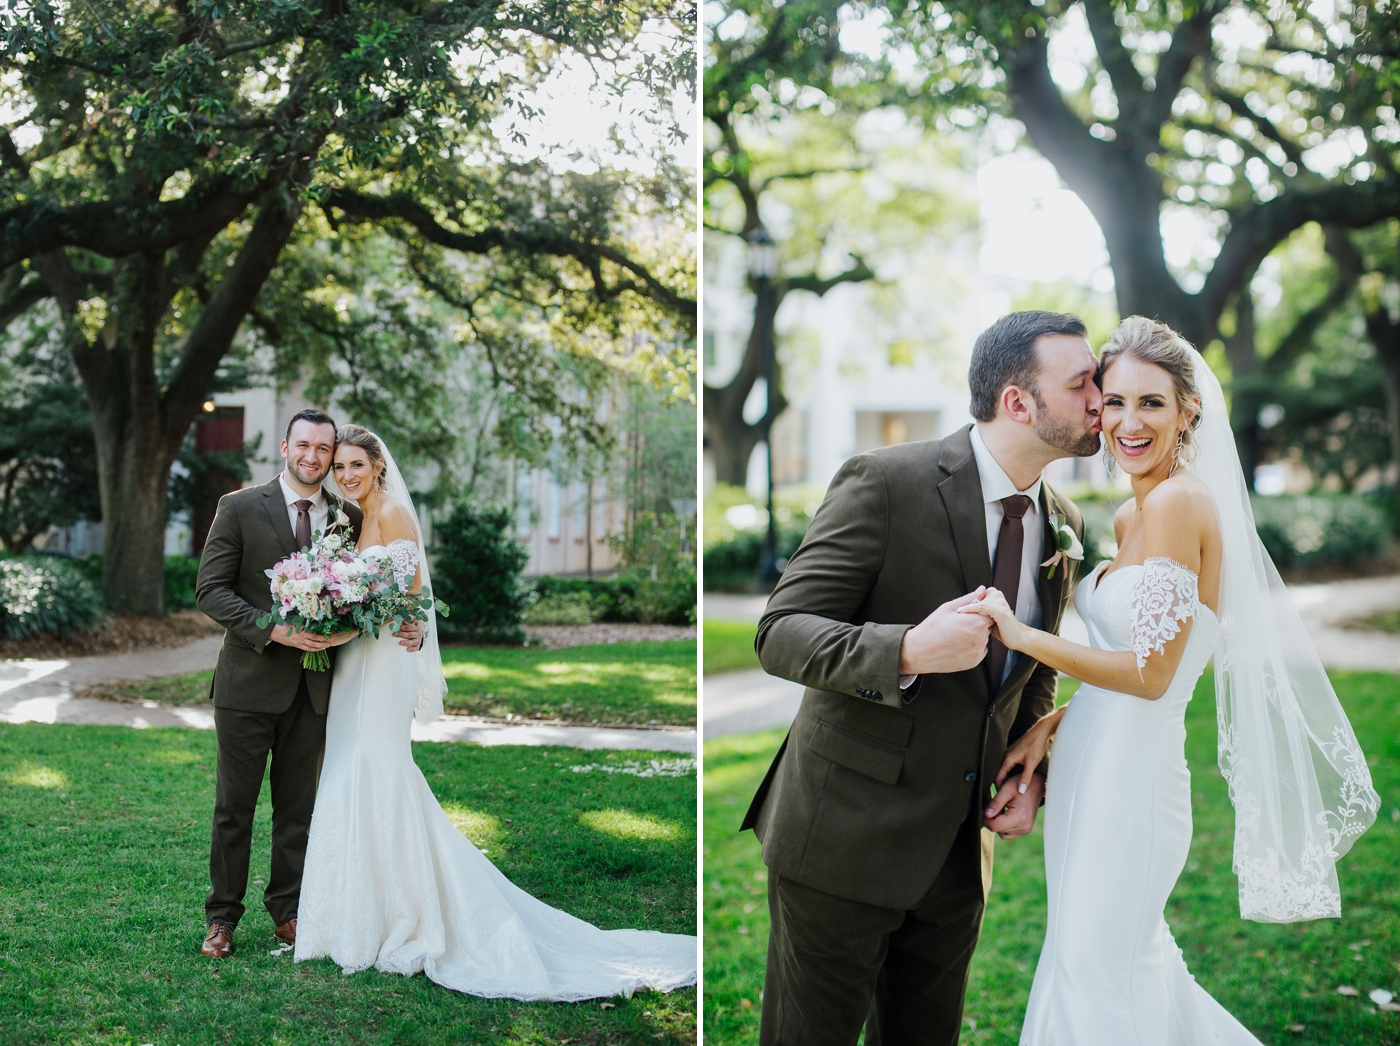 Telfair Square Elopement in Savannah - Izzy and Co.